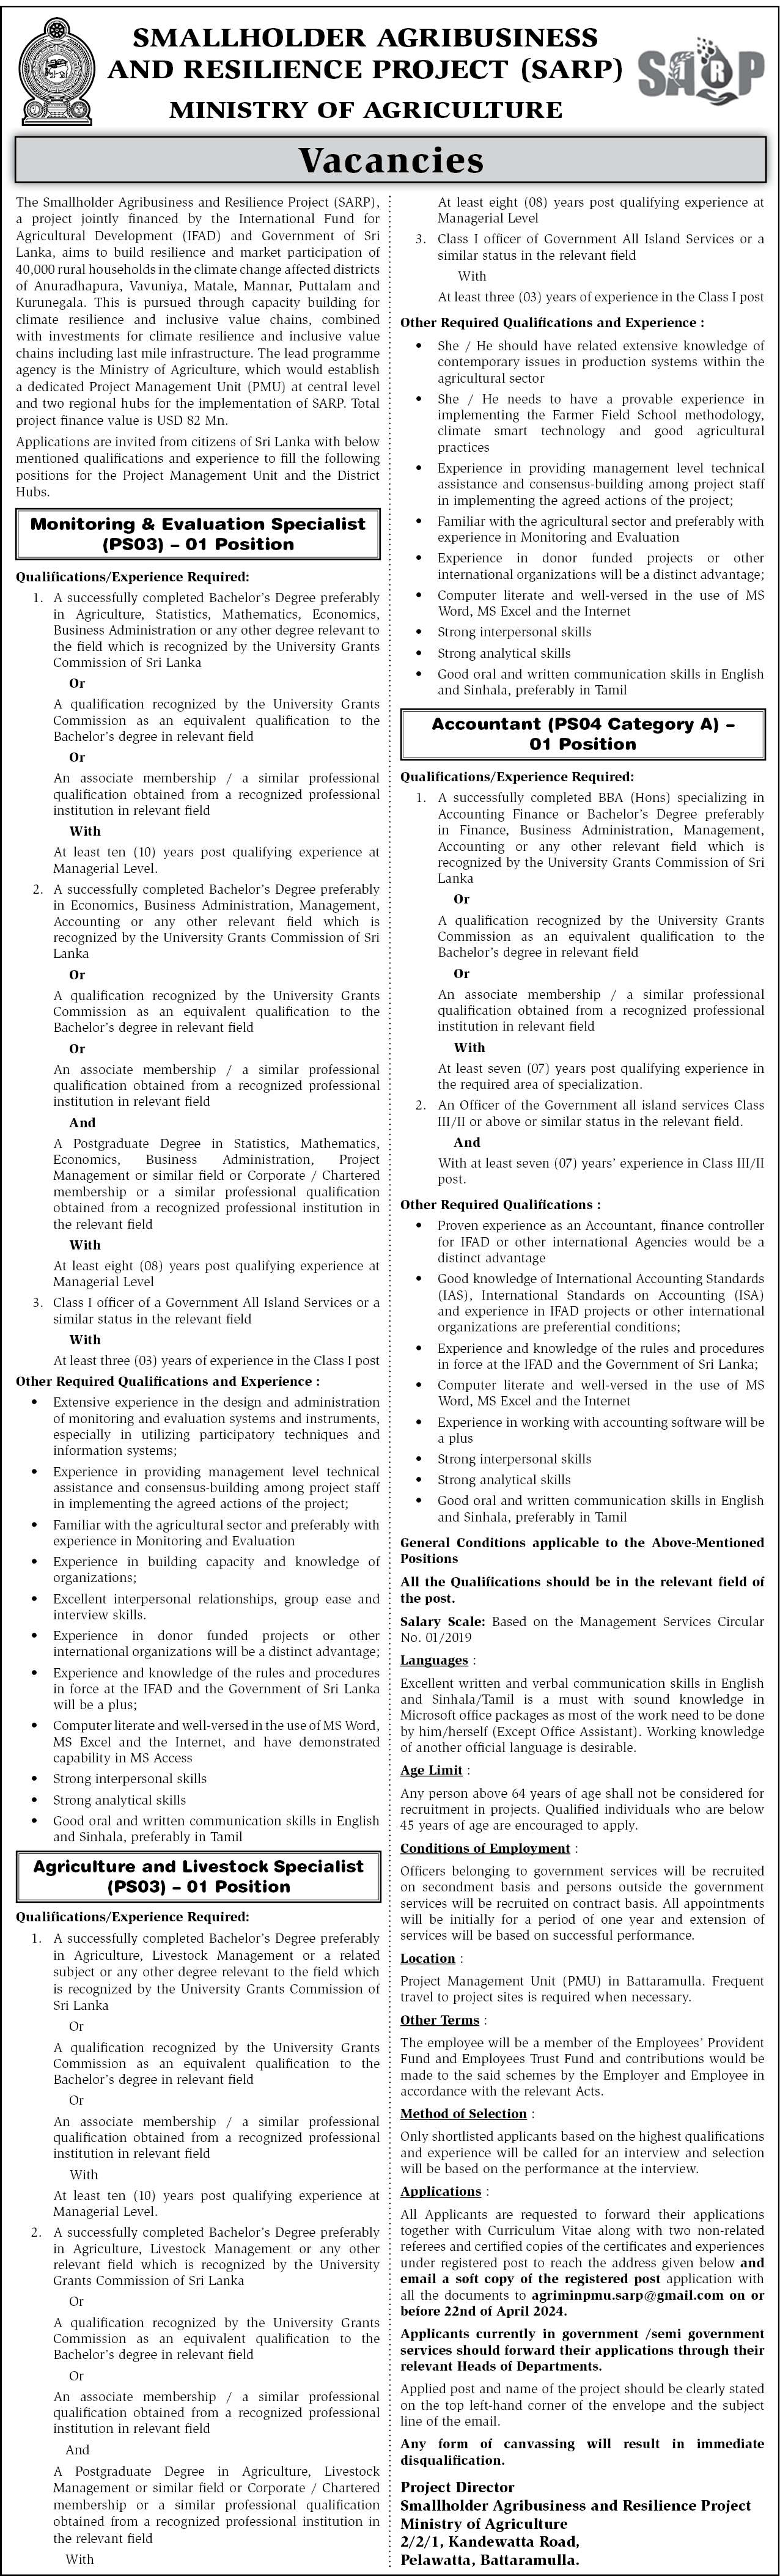 Monitoring and Evaluation Specialist, Agriculture and Livestock Specialist, Accountant - Ministry of Agriculture